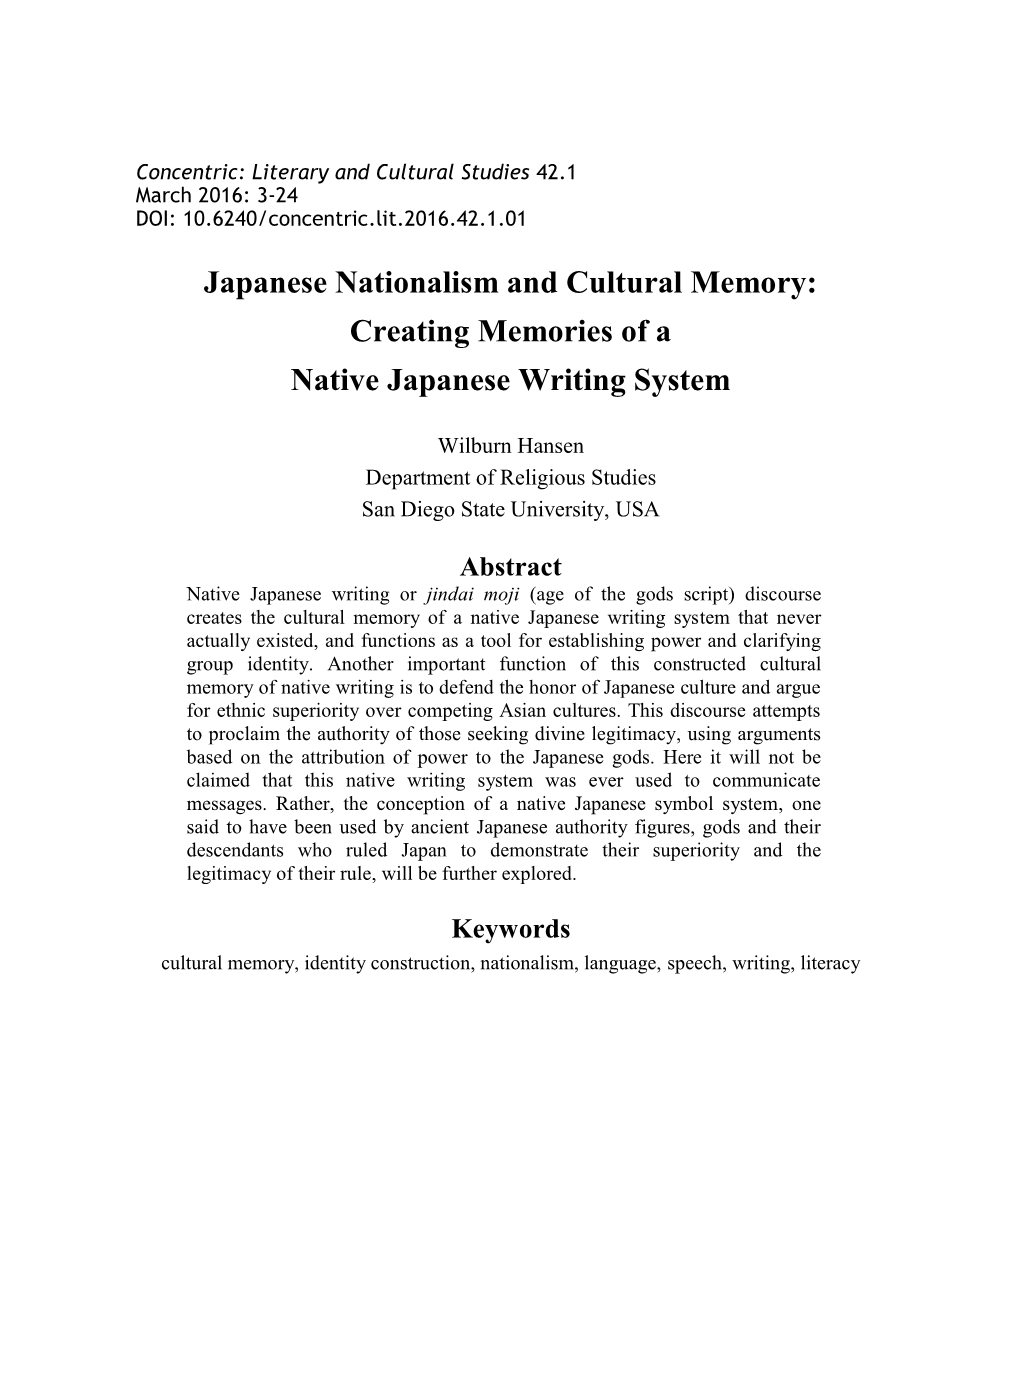 Japanese Nationalism and Cultural Memory: Creating Memories of a Native Japanese Writing System